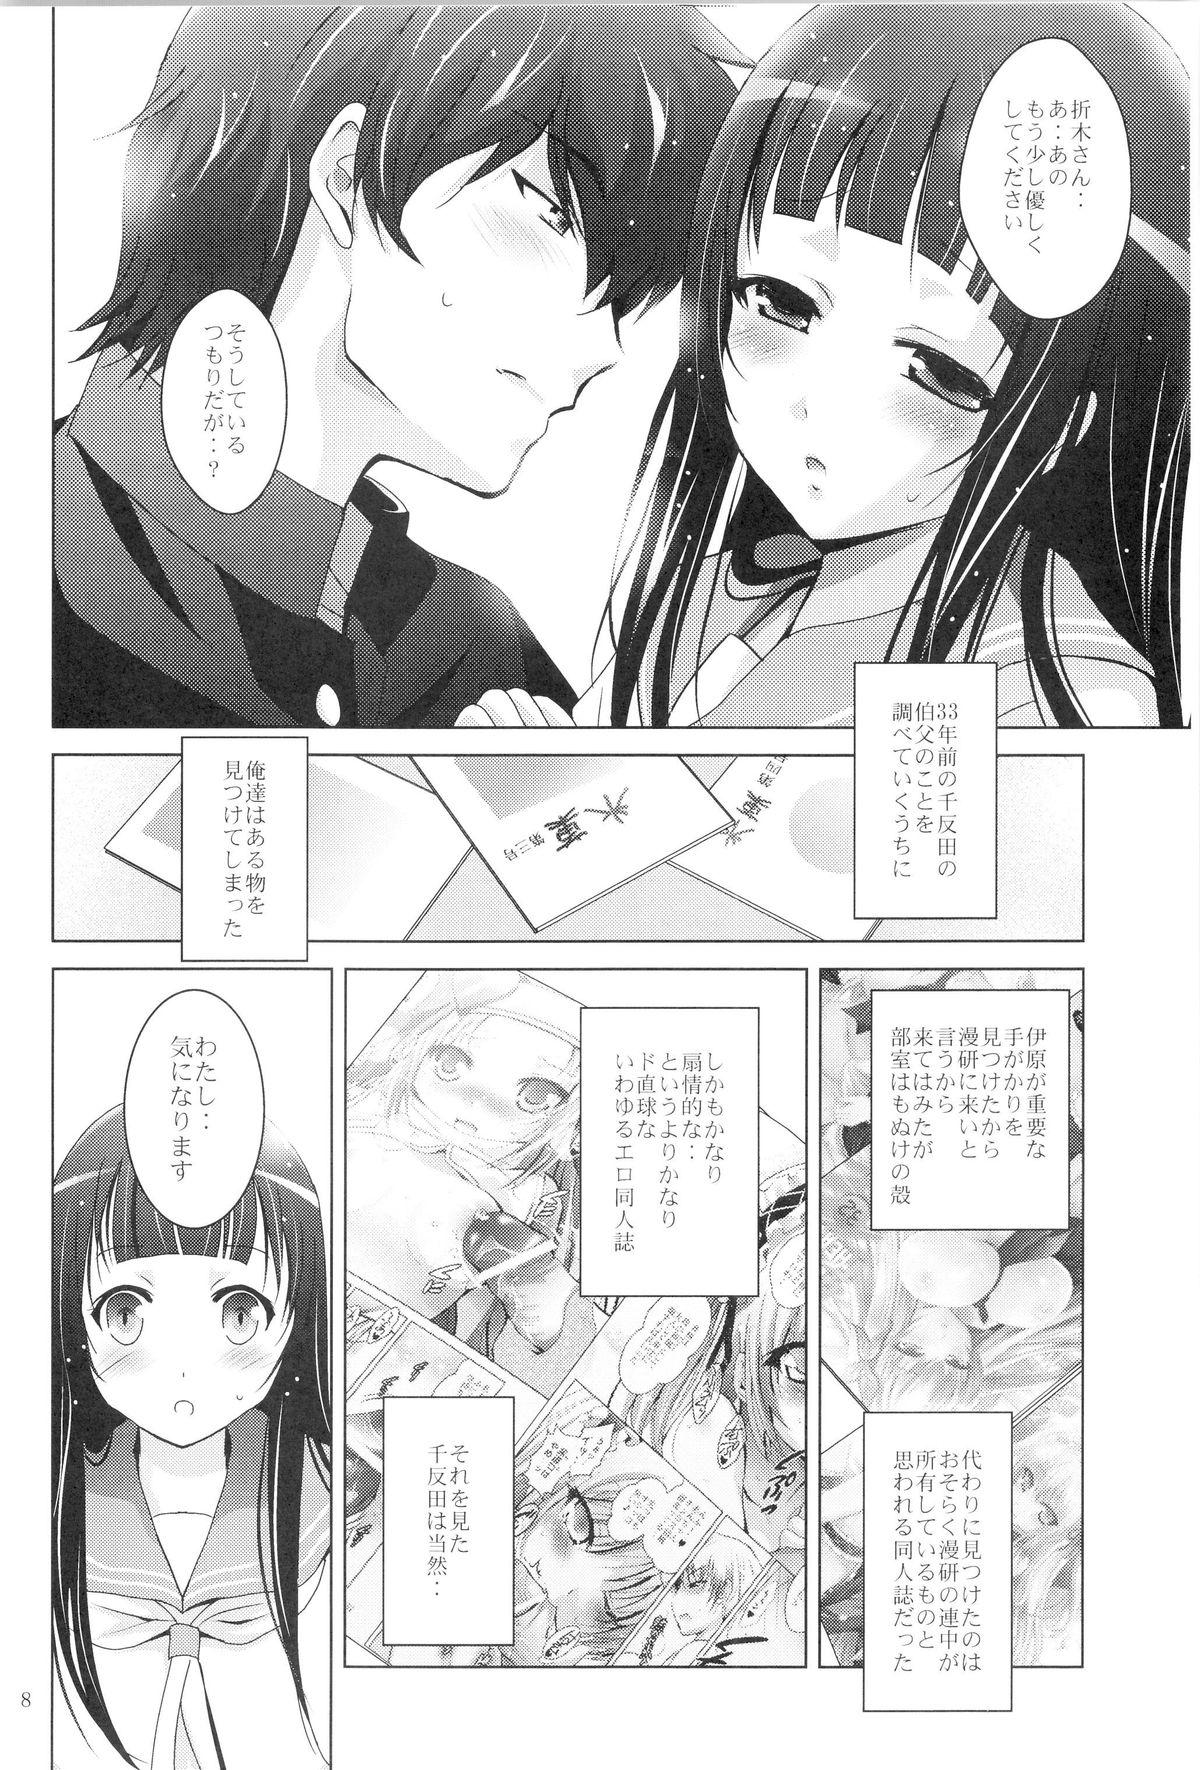 Curious Mousou Theater 33 - Hyouka Softcore - Page 7